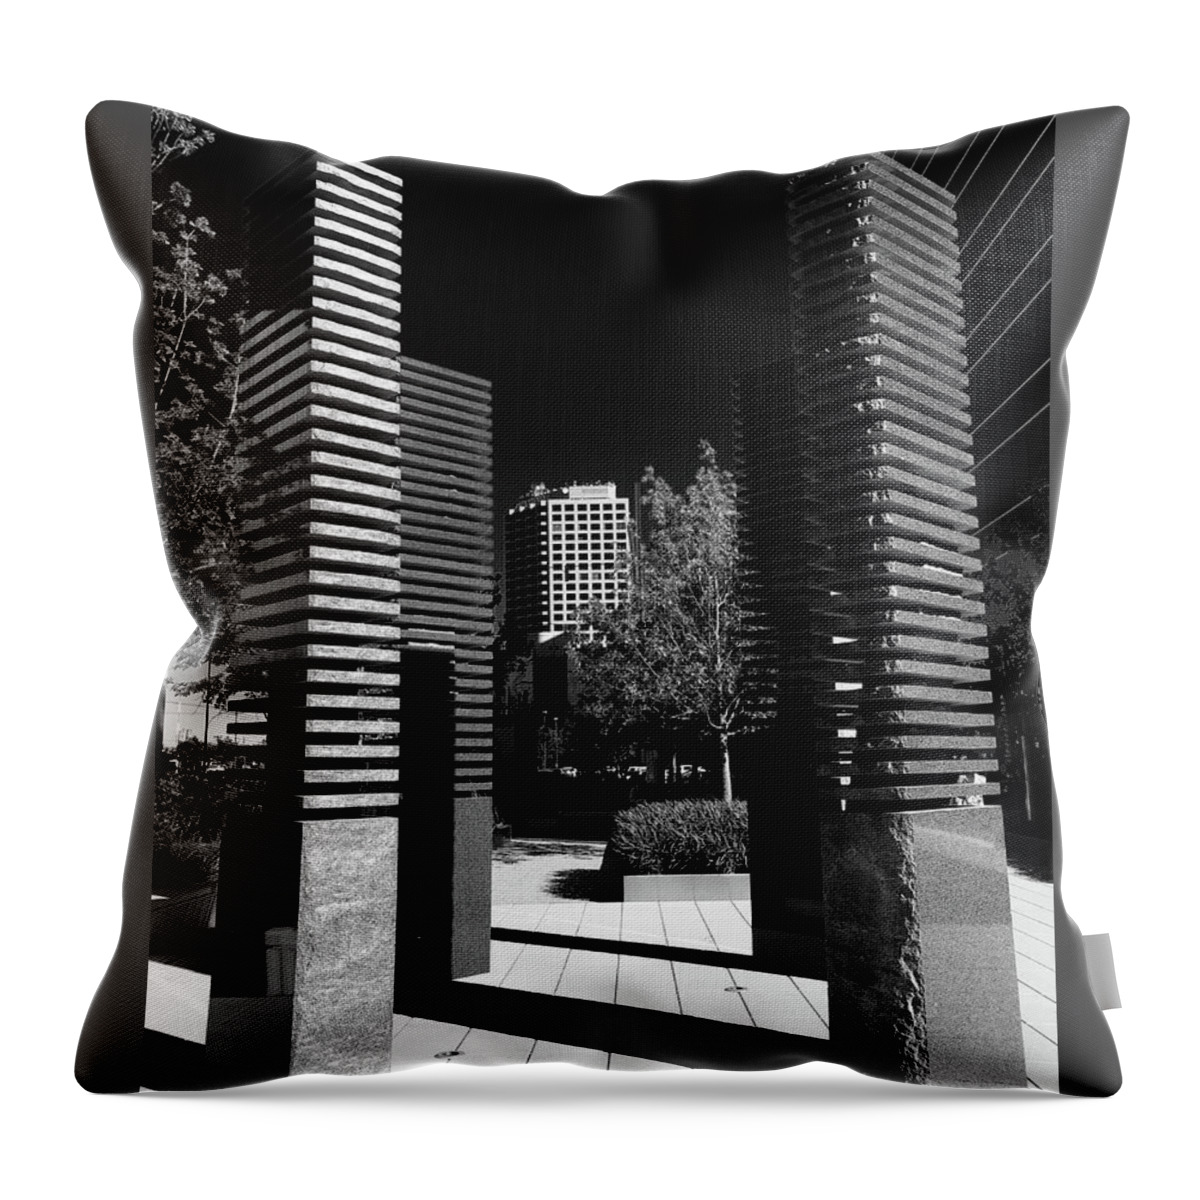 Bland And White Throw Pillow featuring the photograph Dallas Arts District by Doris Aguirre